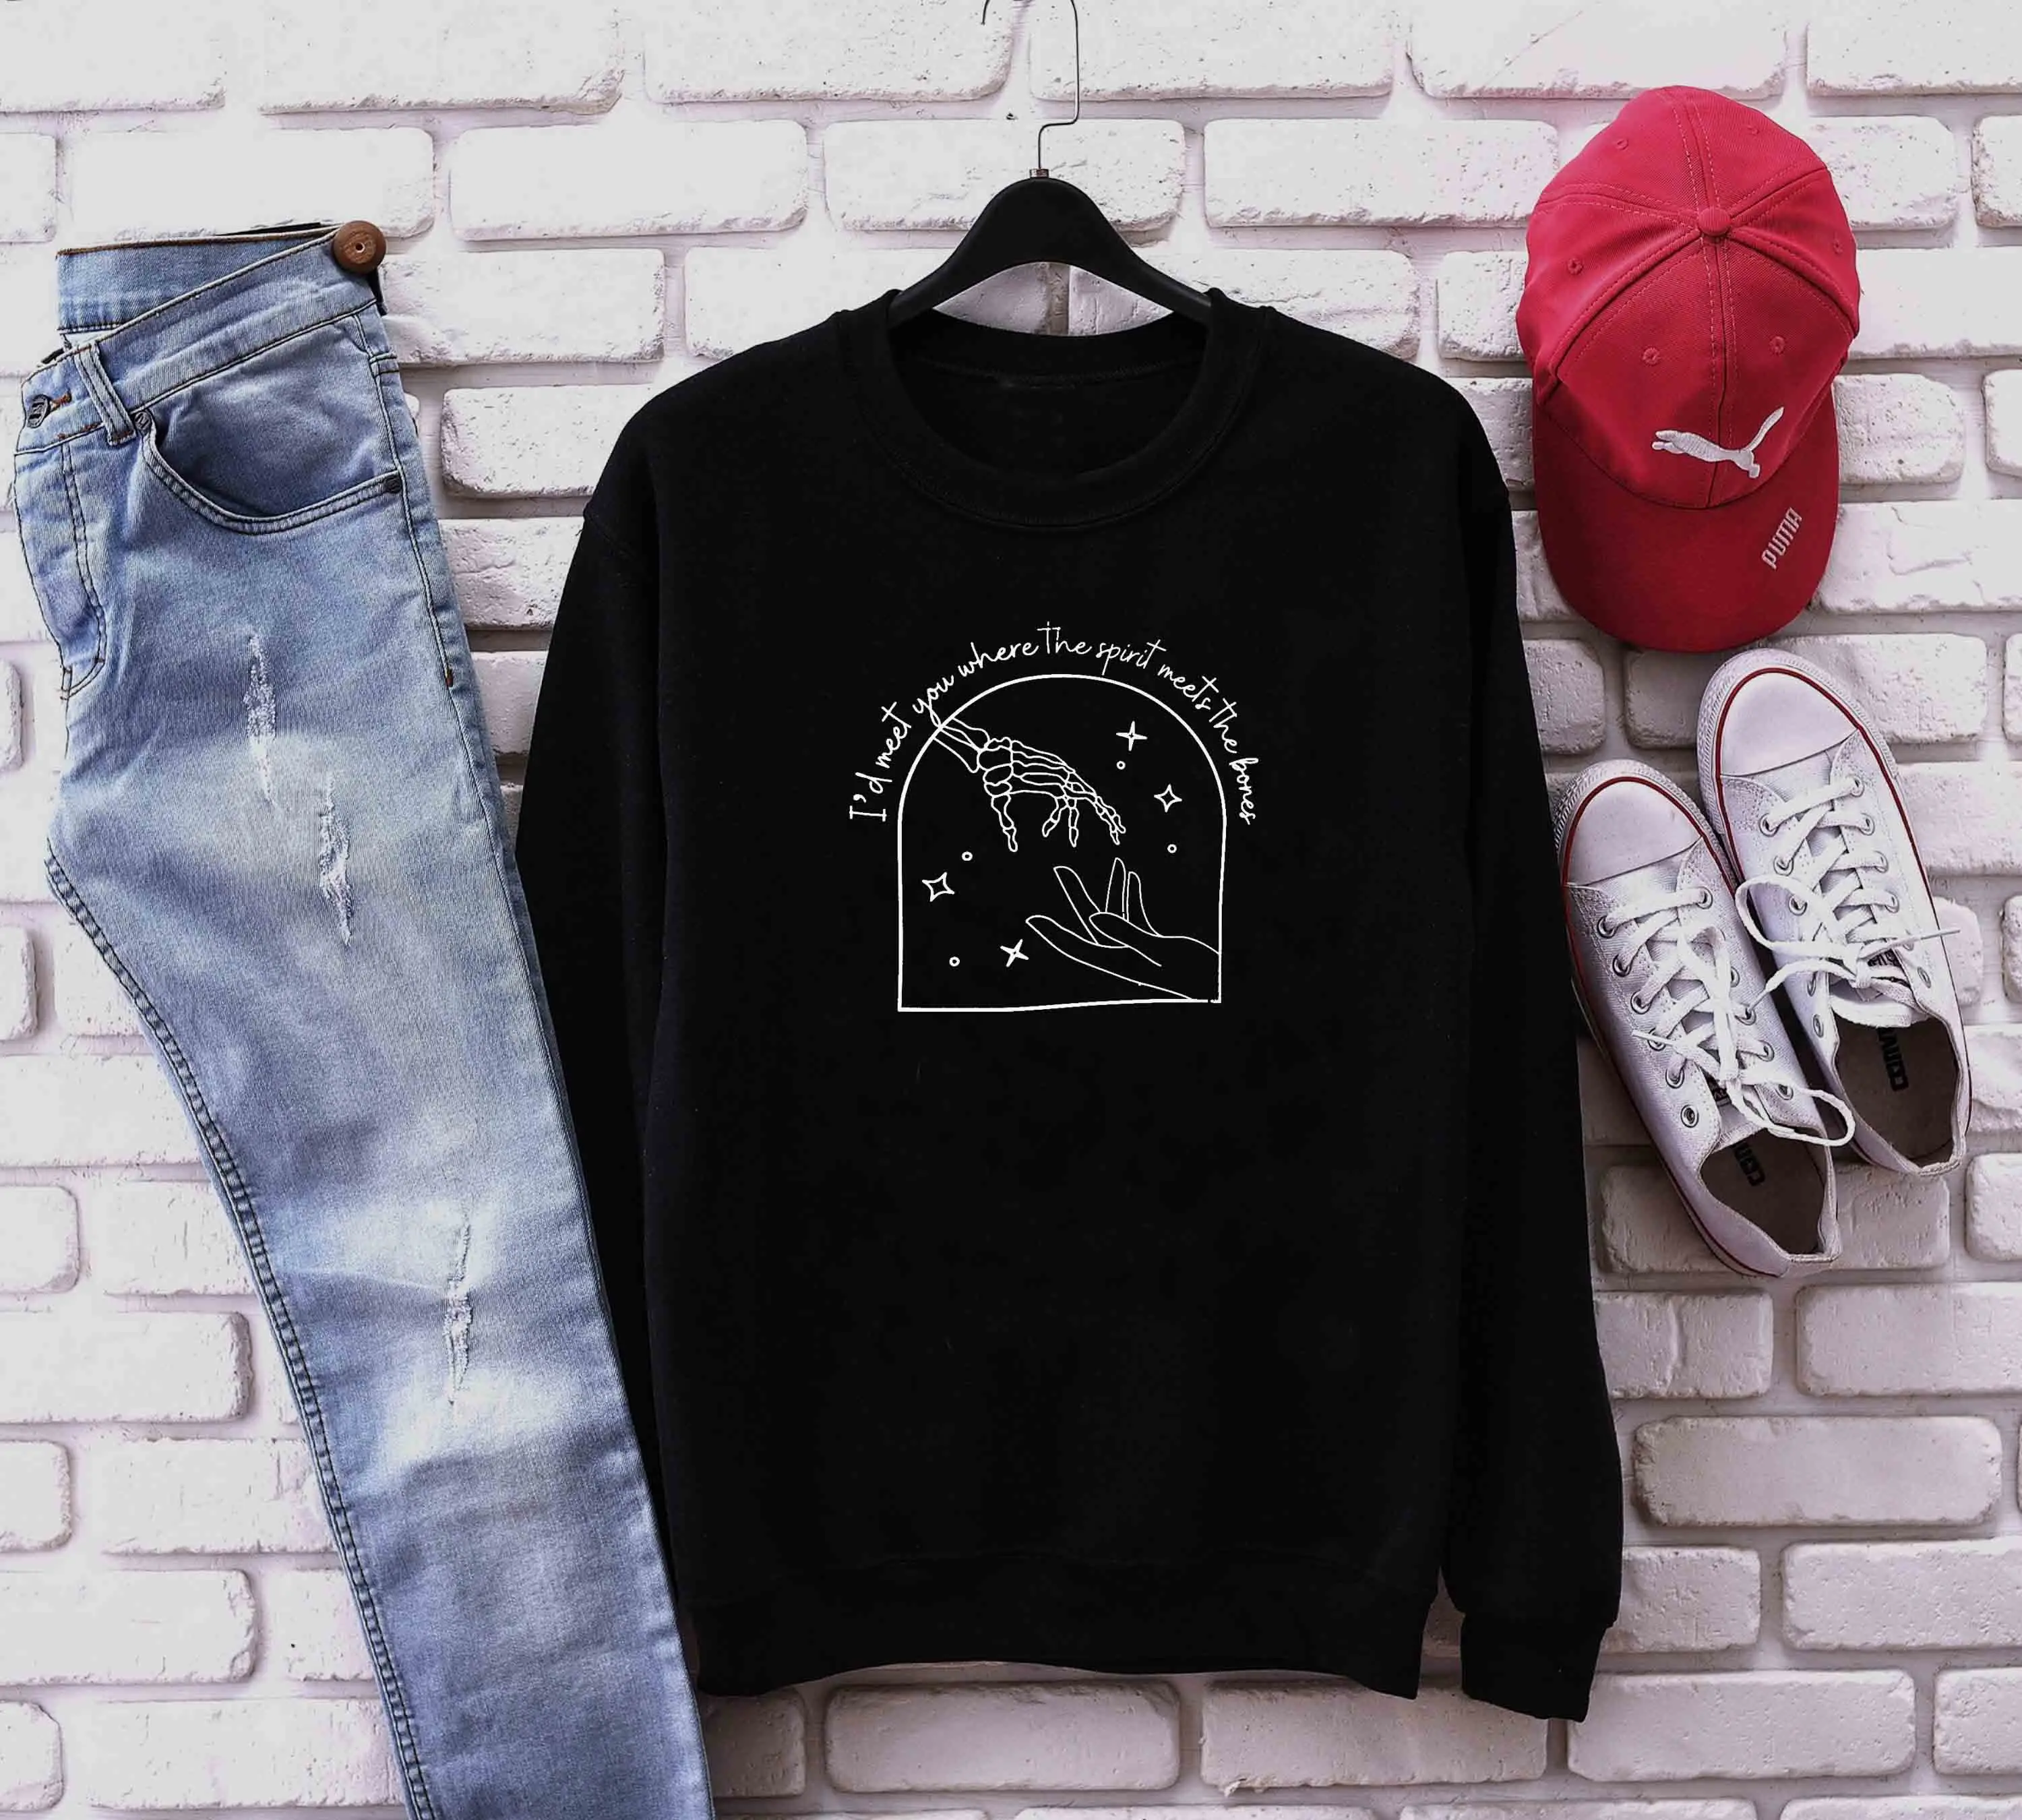 

I meet you where the spirits meet the bone gothic funny graphic horror quote sweatshirt aesthetic tumblr pullovers party tops